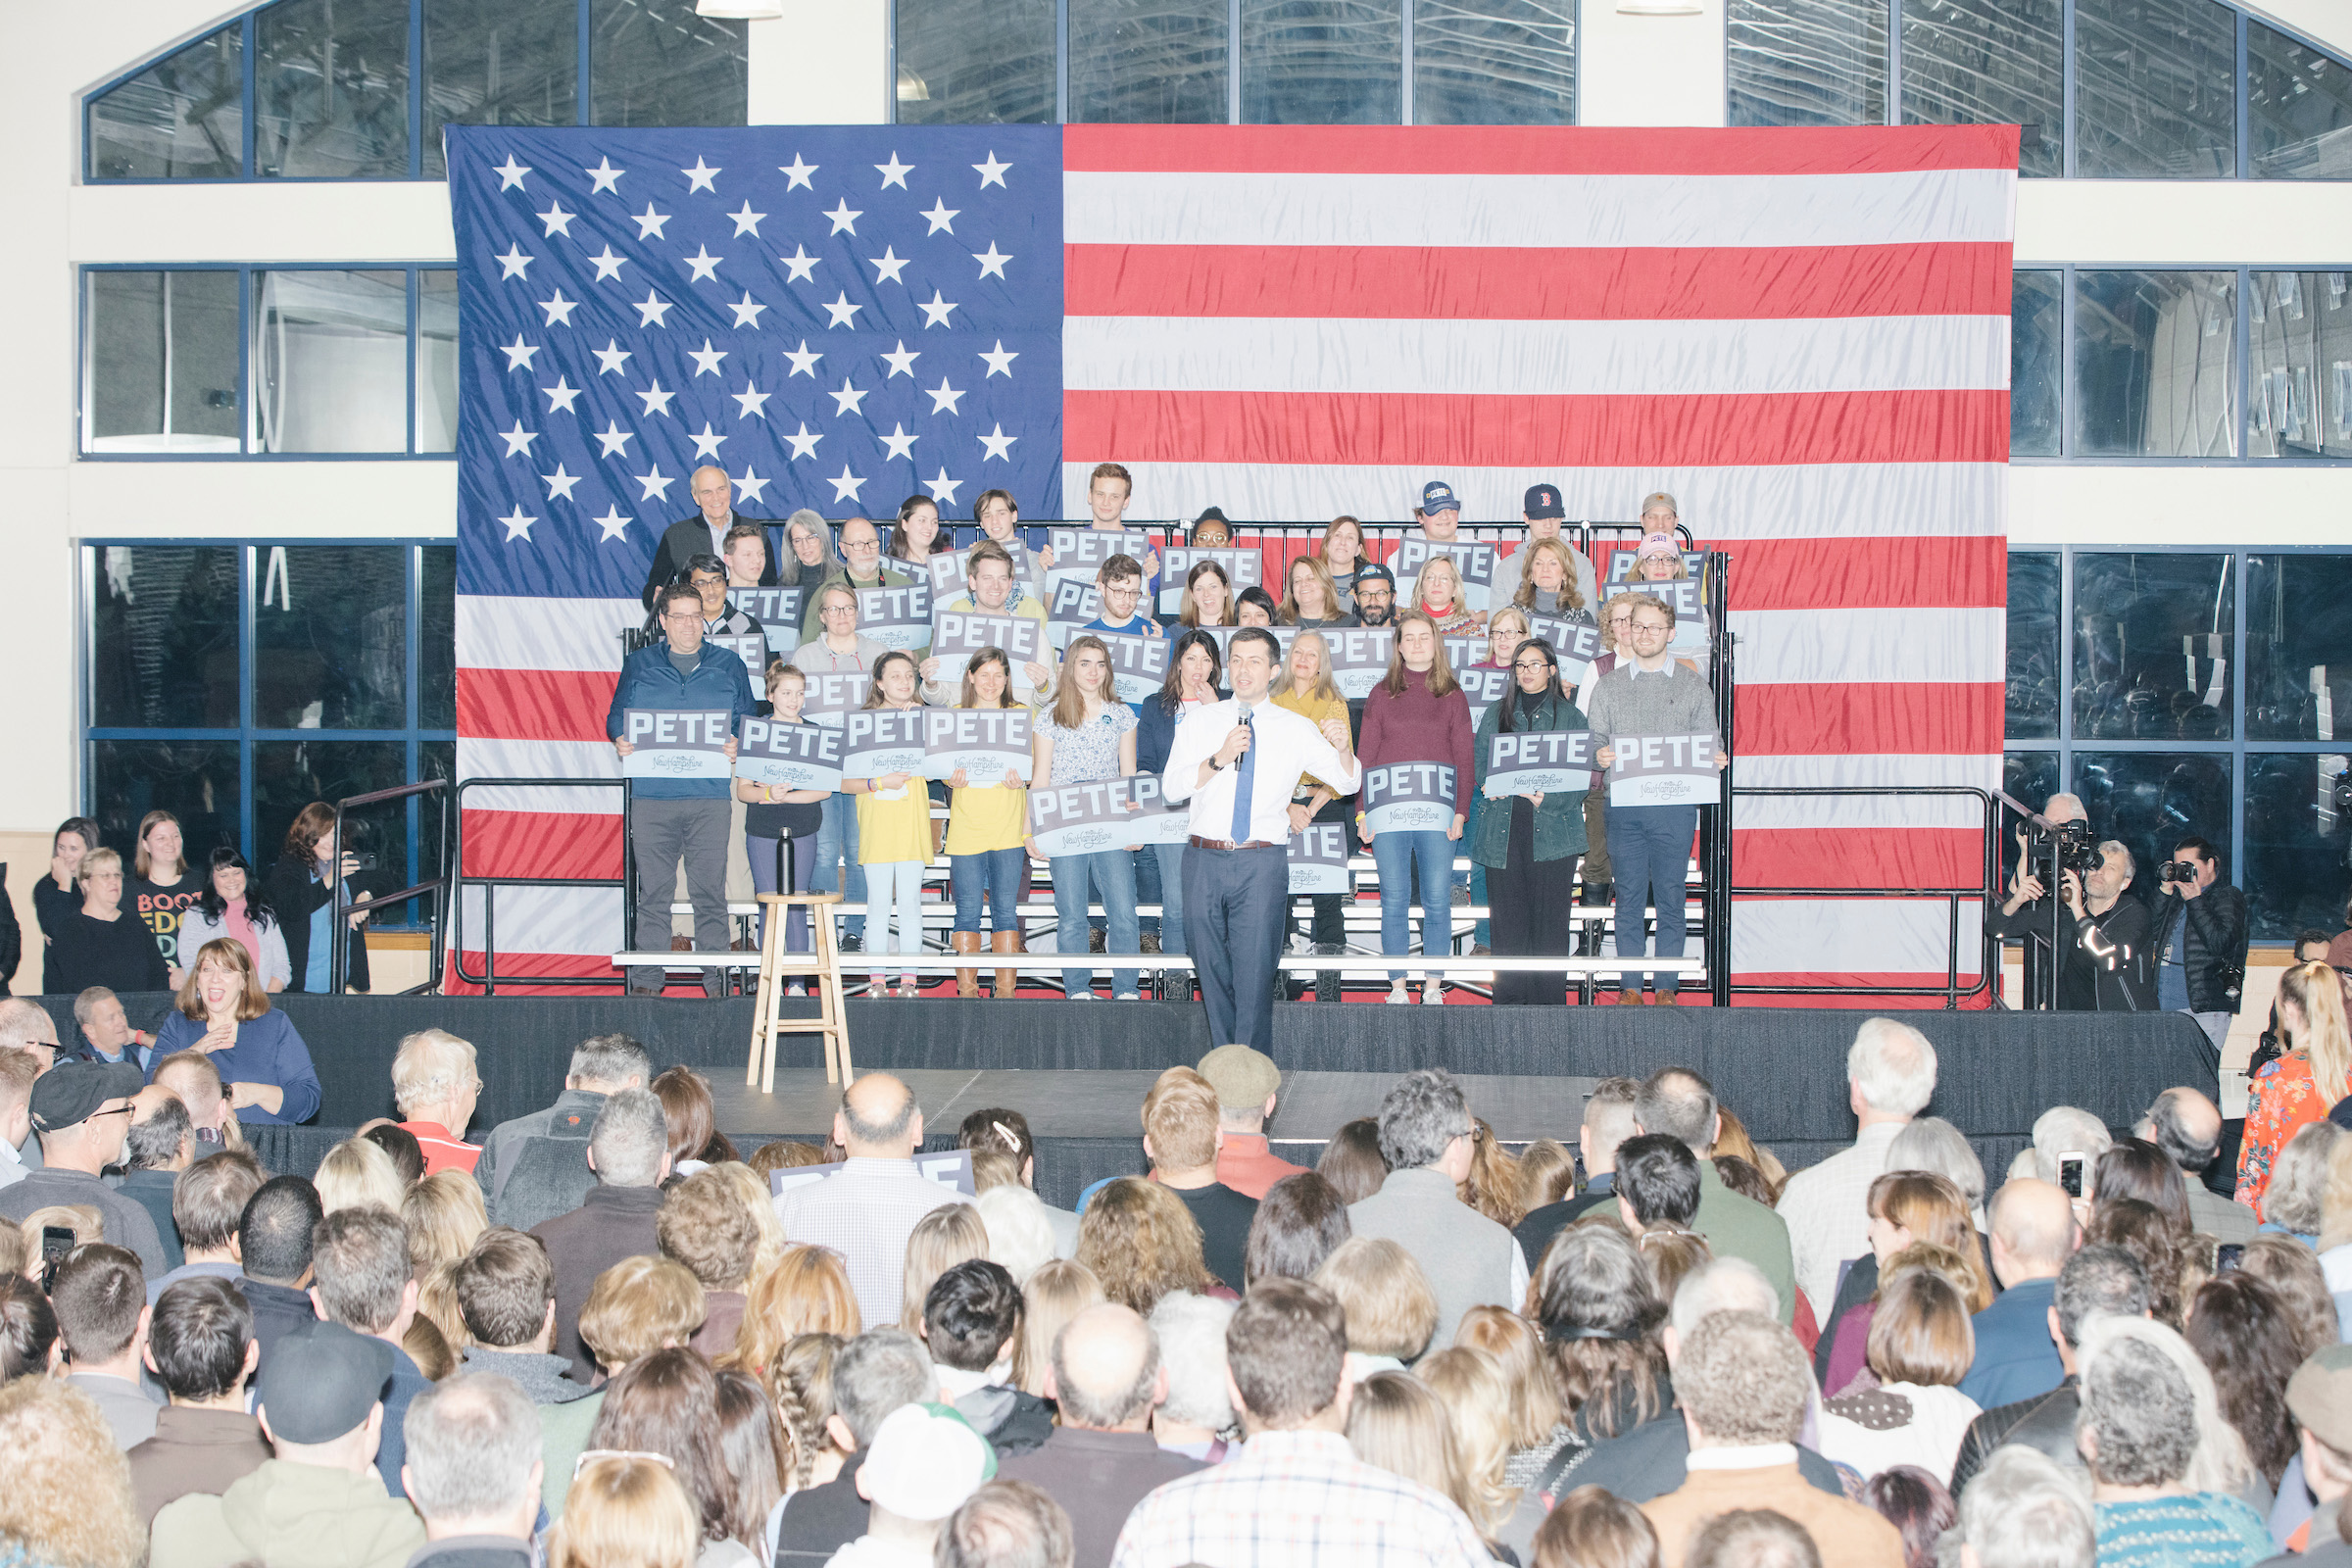 Pete Buttigieg speaks at a campaign rally at Exeter High School